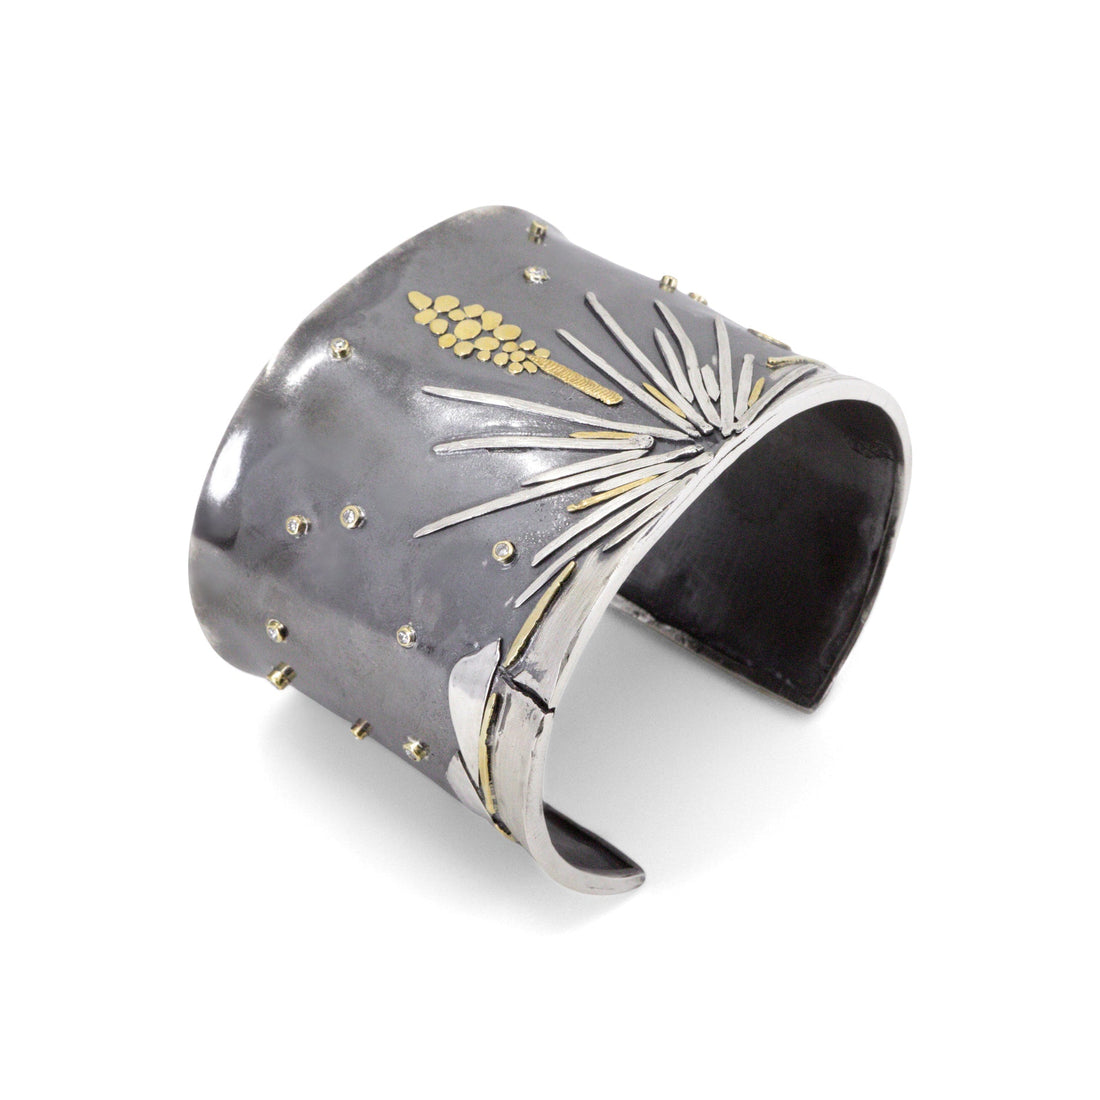 Wide mixed metal statement cuff with desert landscape motif and diamond accents by Erin Cuff Jewelry.